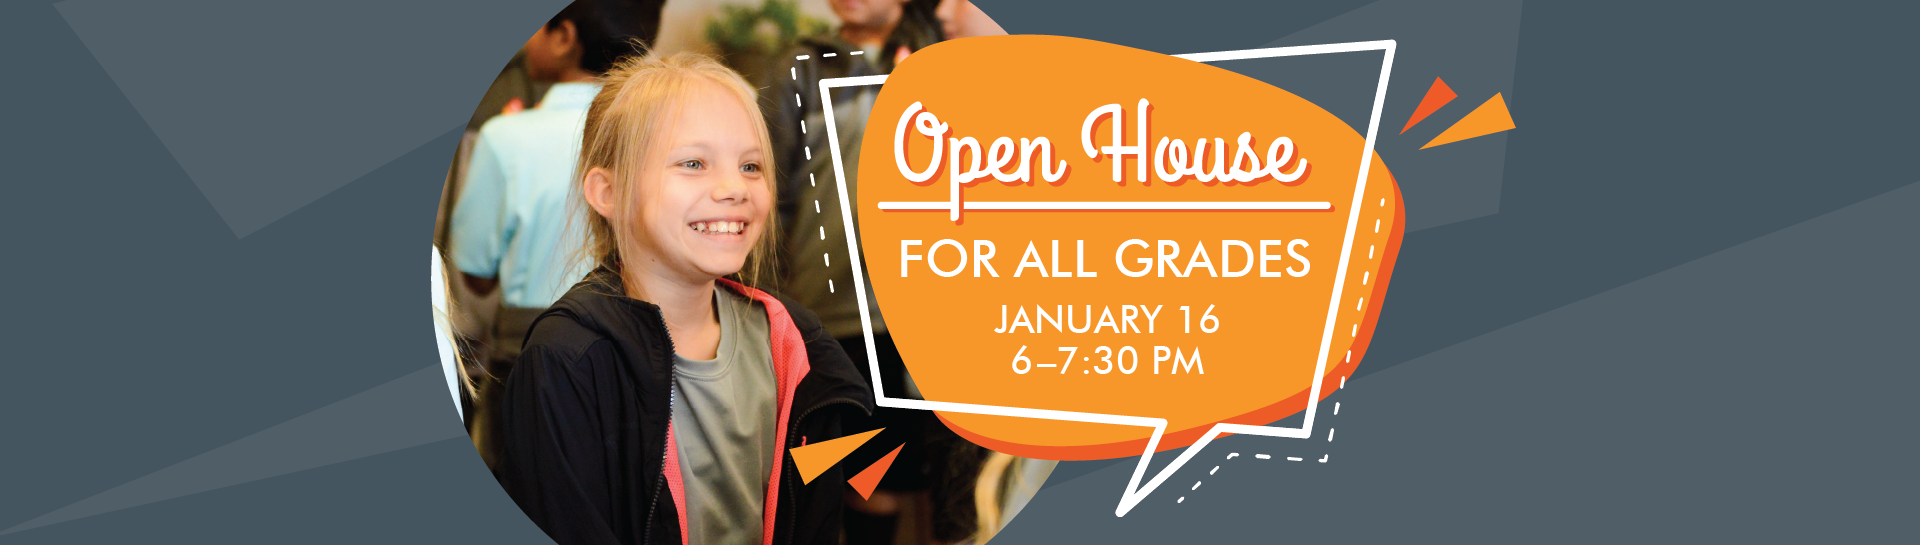 Open House for All Grades